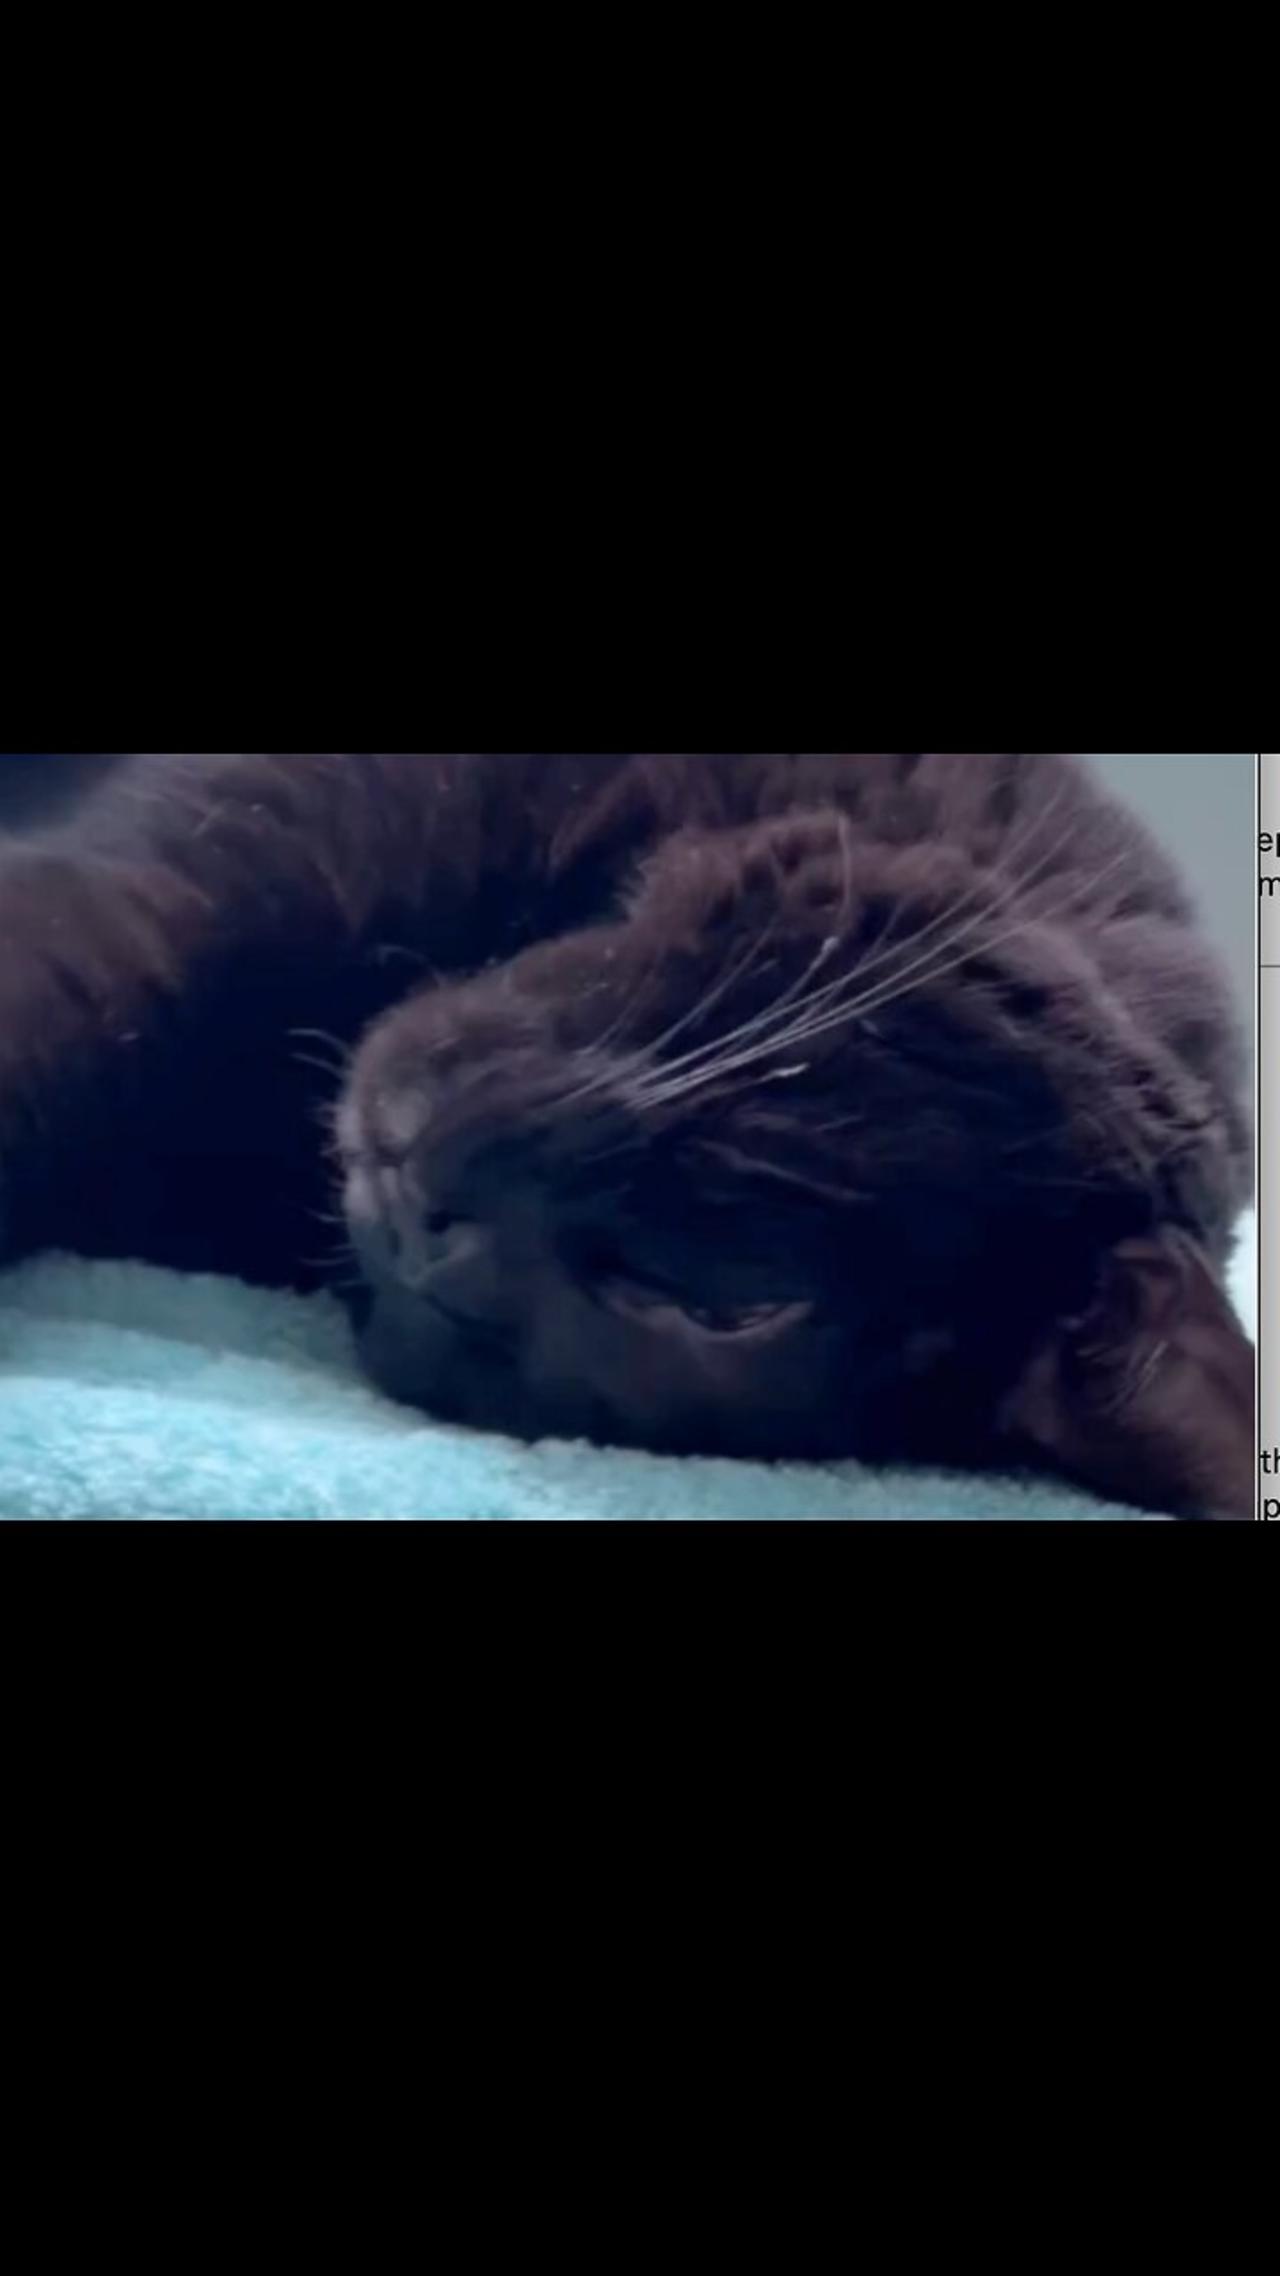 Adopting a Cat from a Shelter Vlog - Cute Precious Piper Can Sleep with Her Head Upside Down #shorts